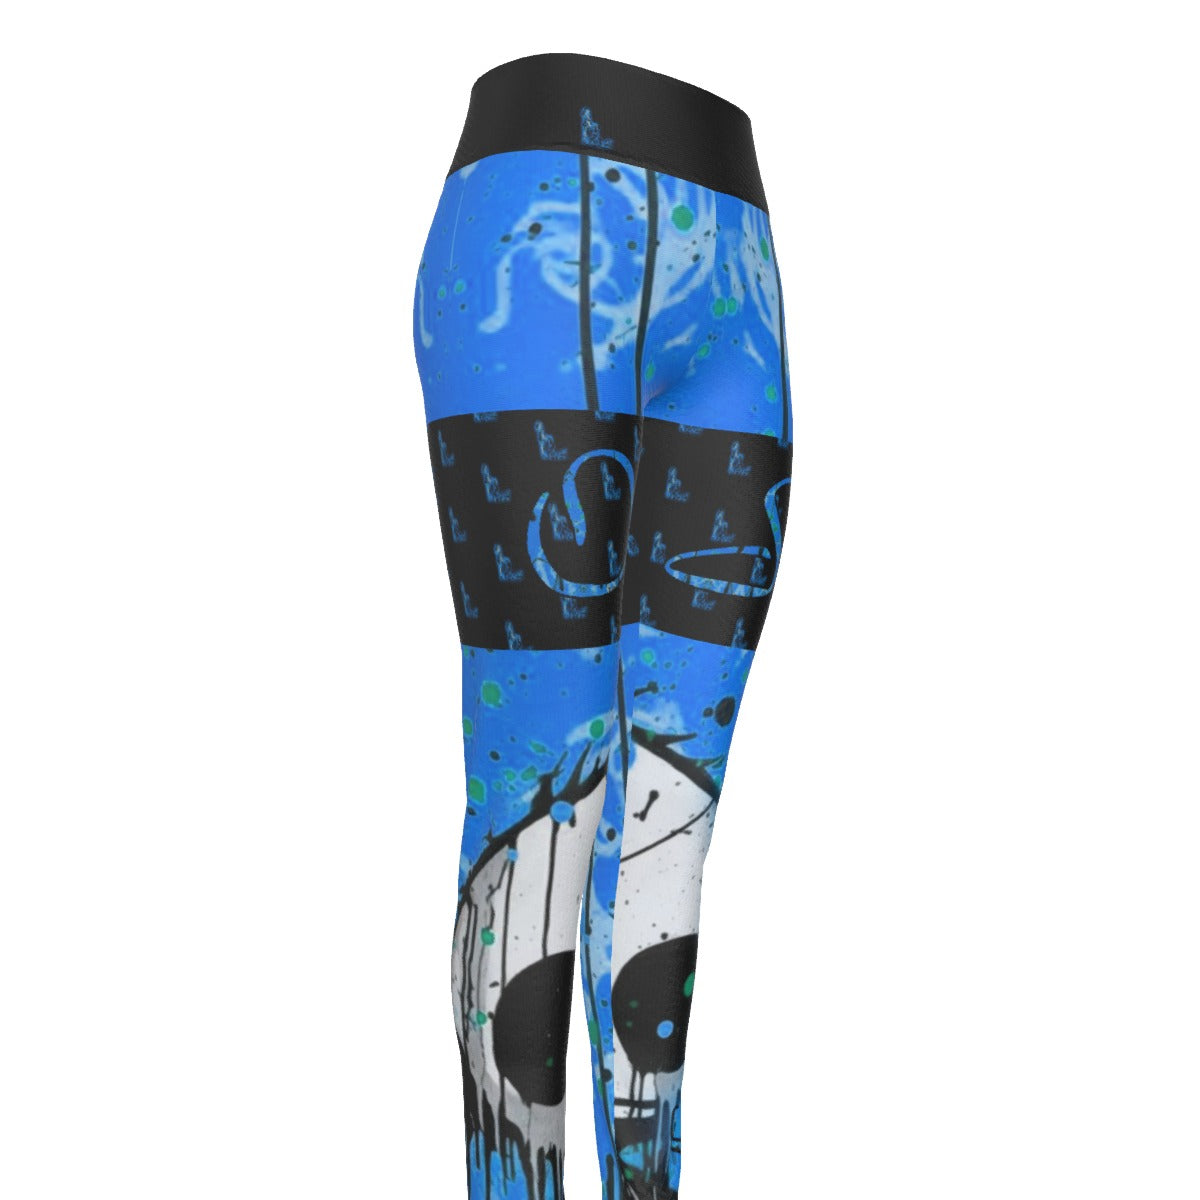 Officially Sexy Creepy Boy Officially Sexy Powder Blue Women's High Waist Thigh High Booty Popper Leggings #2 With OS On Front And Back Thighs (English) 2